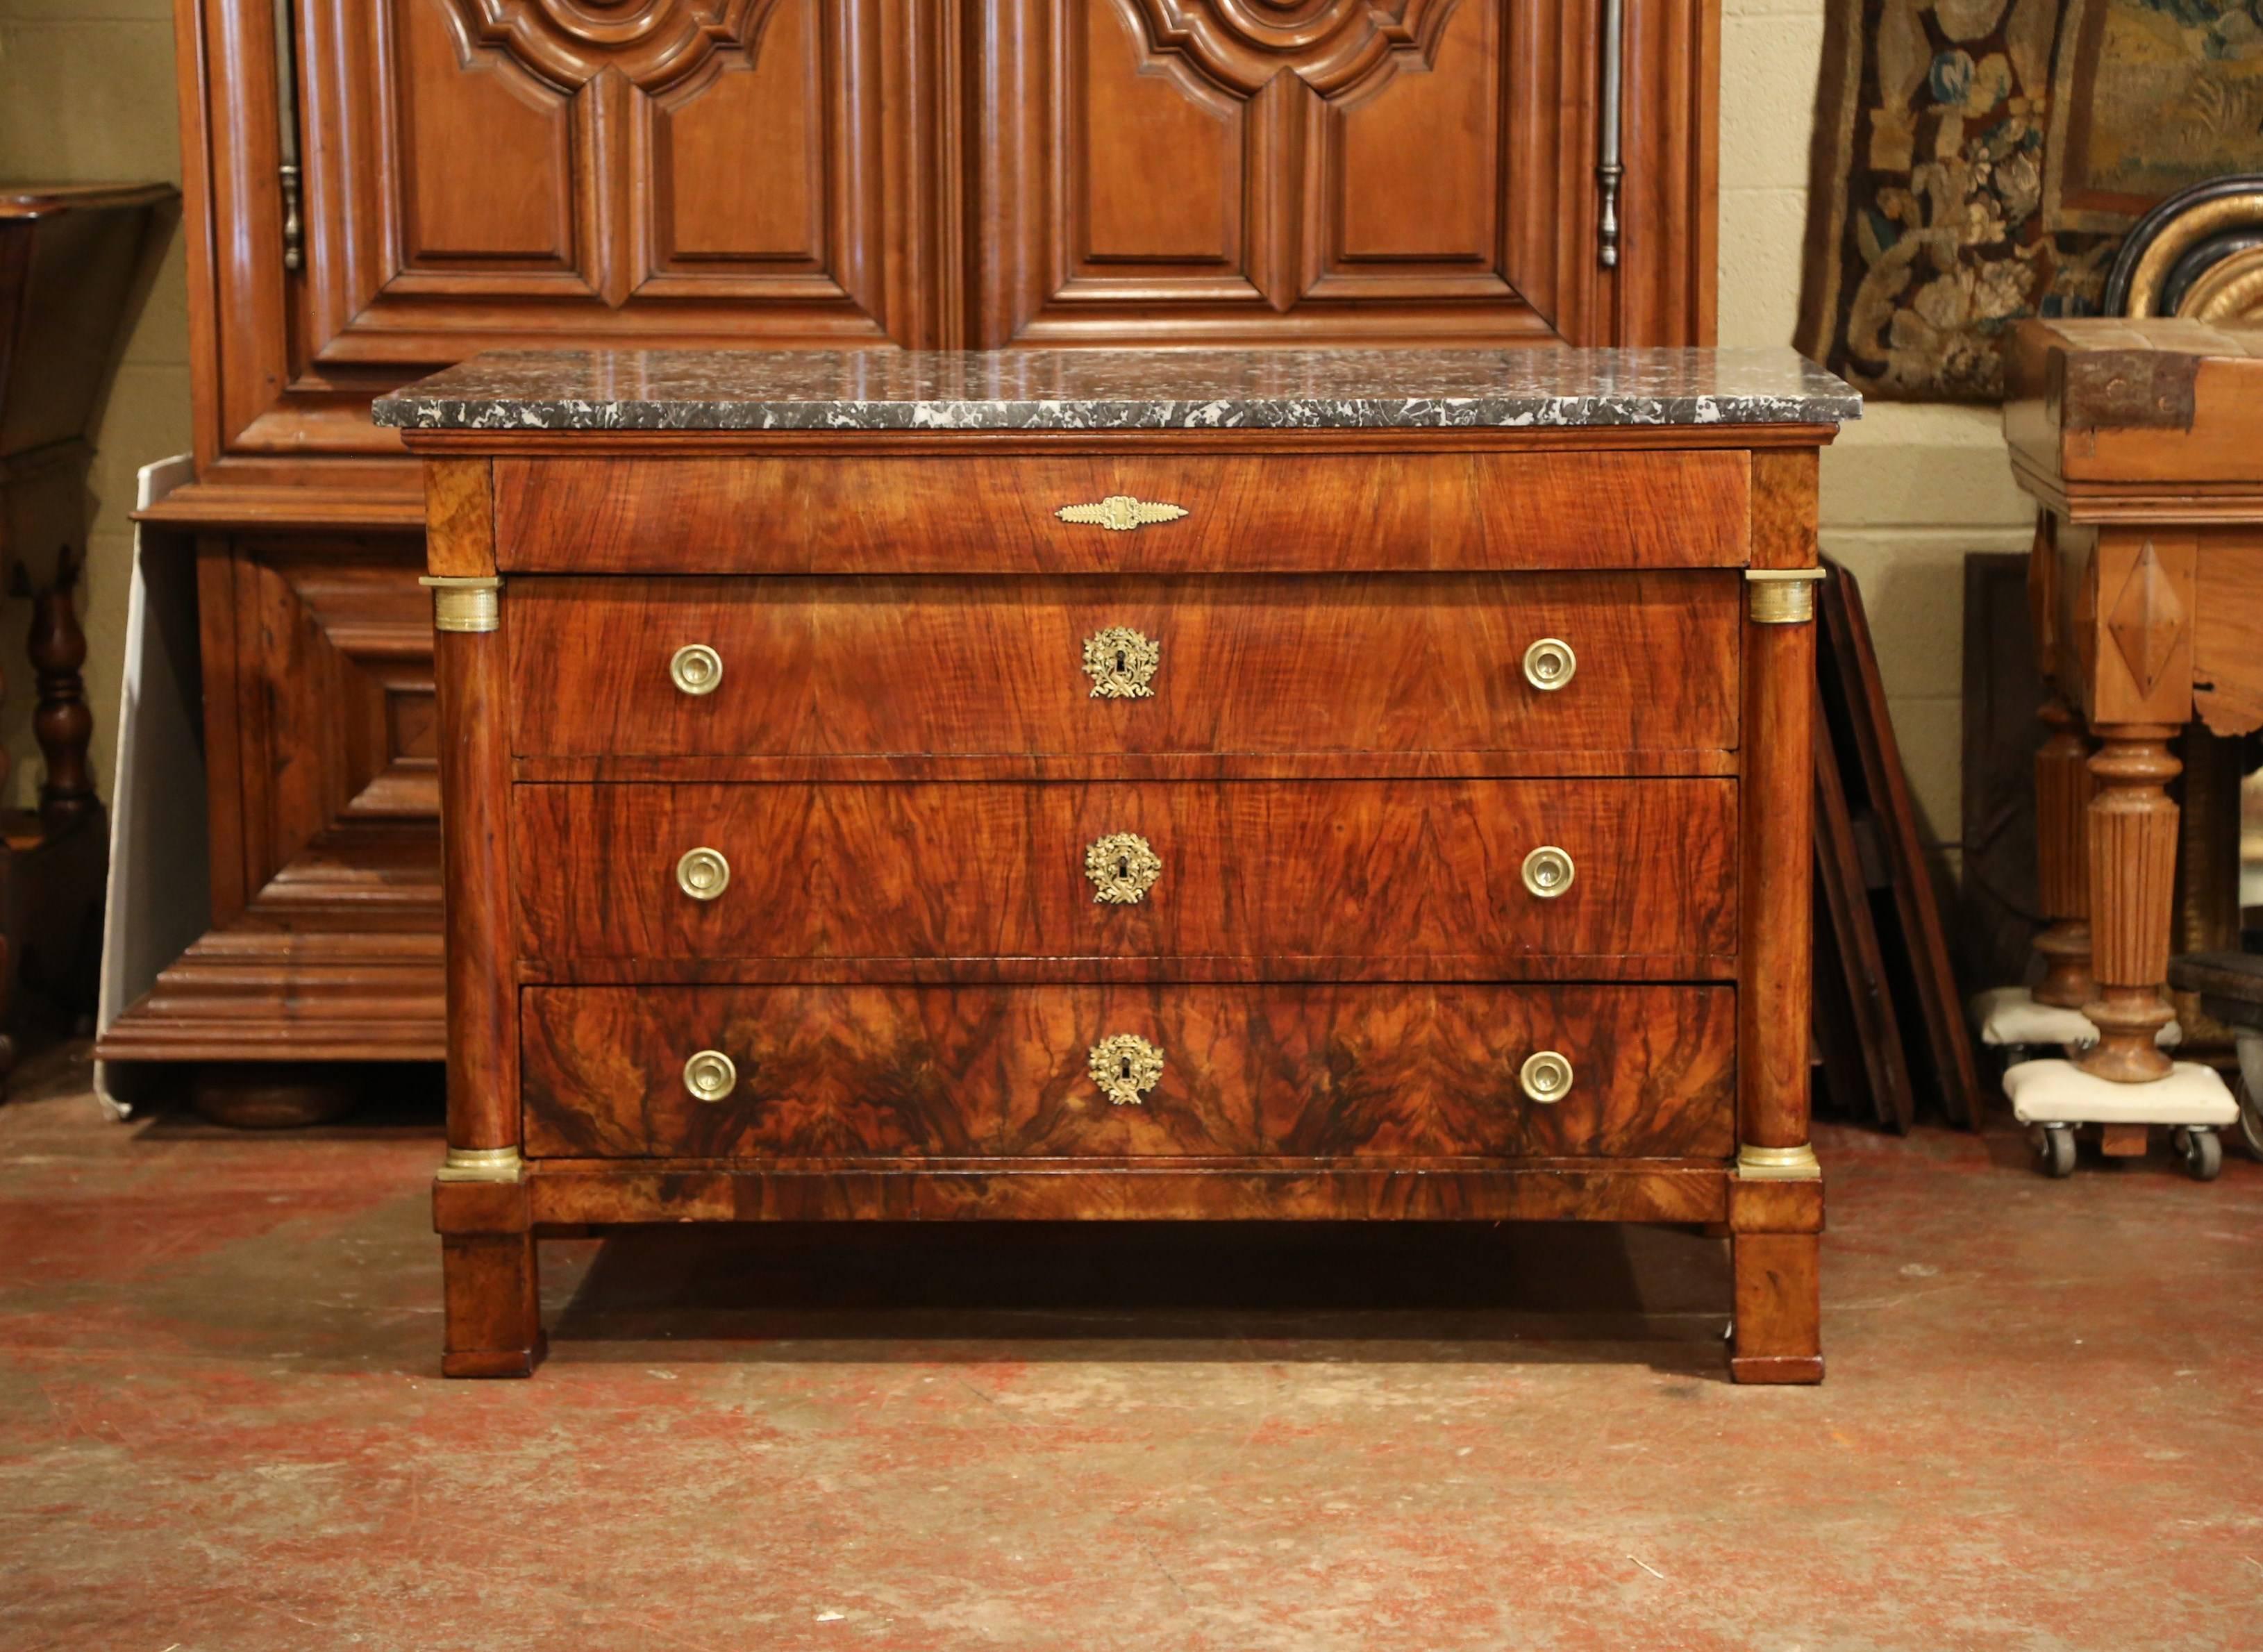 This elegant, antique fruitwood chest of drawers was crafted in France, circa 1830. The traditional commode with veneer marquetry design, features three drawers across the front with original bronze pulls and a fourth additional drawer under the